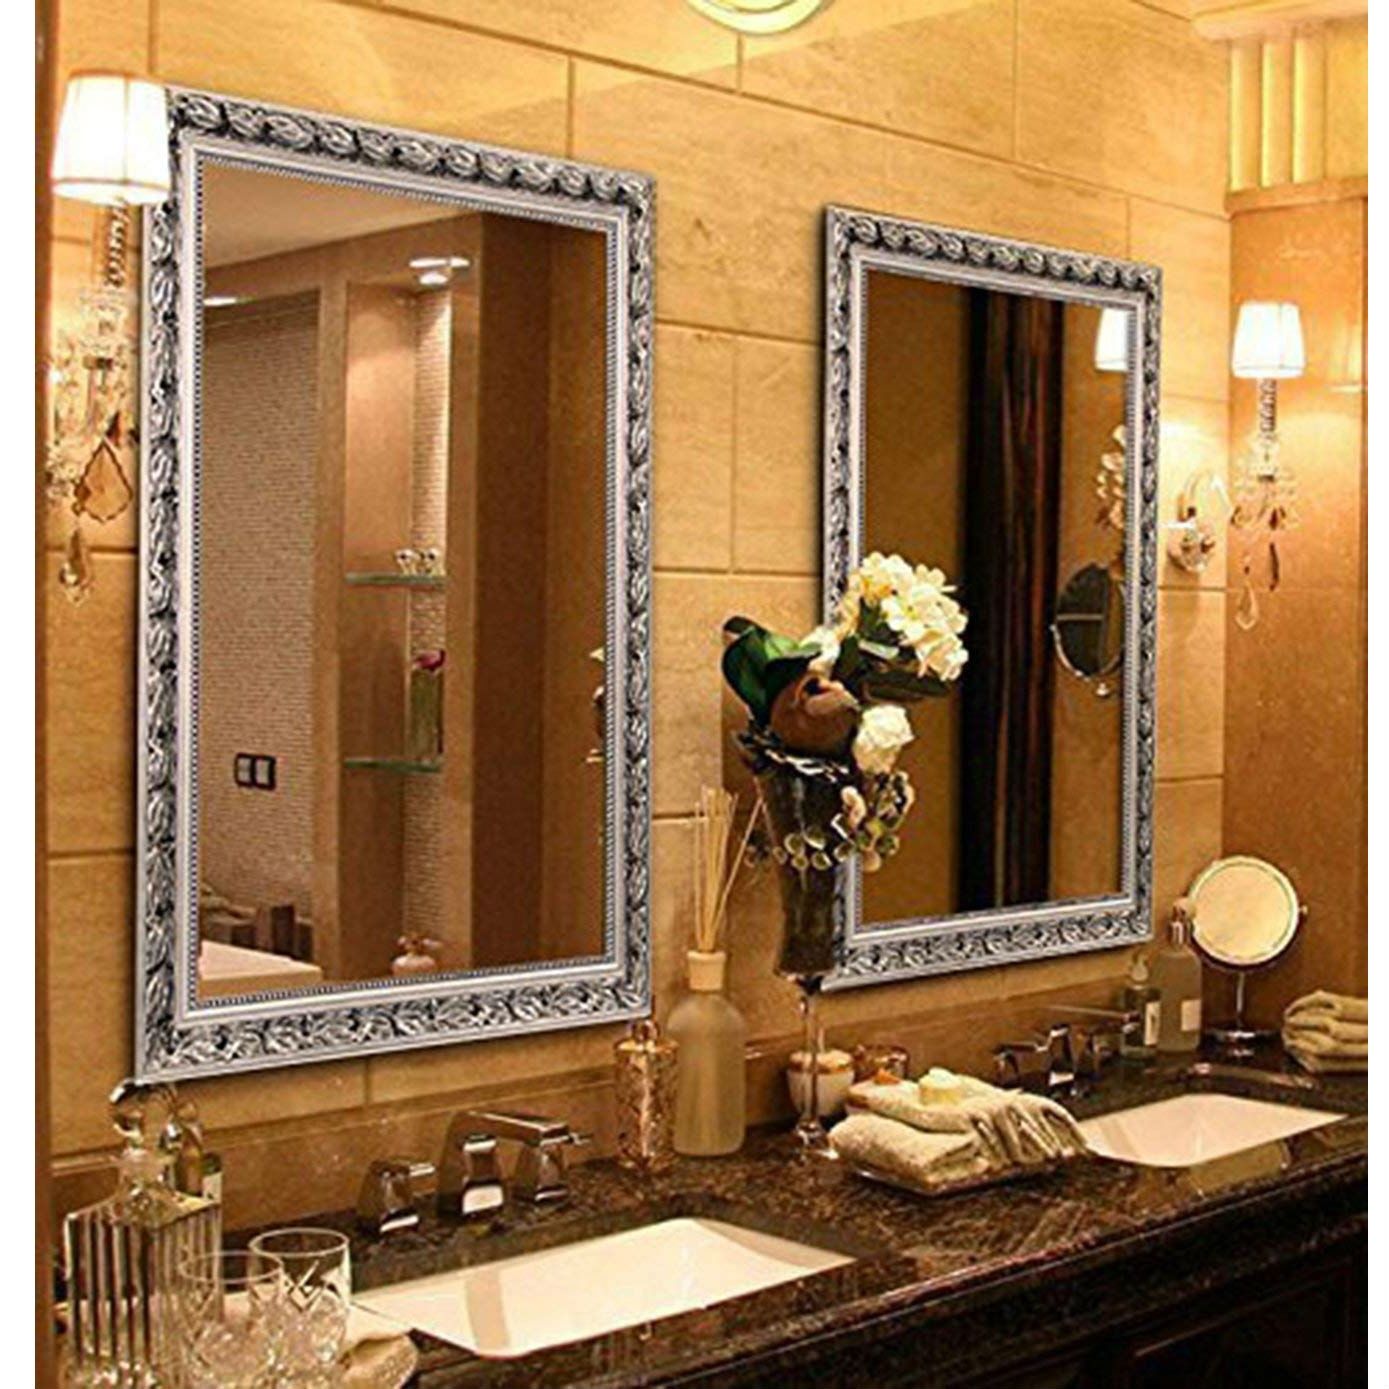 Large 38 X 26 Inch Bathroom Wall Mirror With Baroque Style Silver Wood In Wall Mirrors (View 6 of 15)